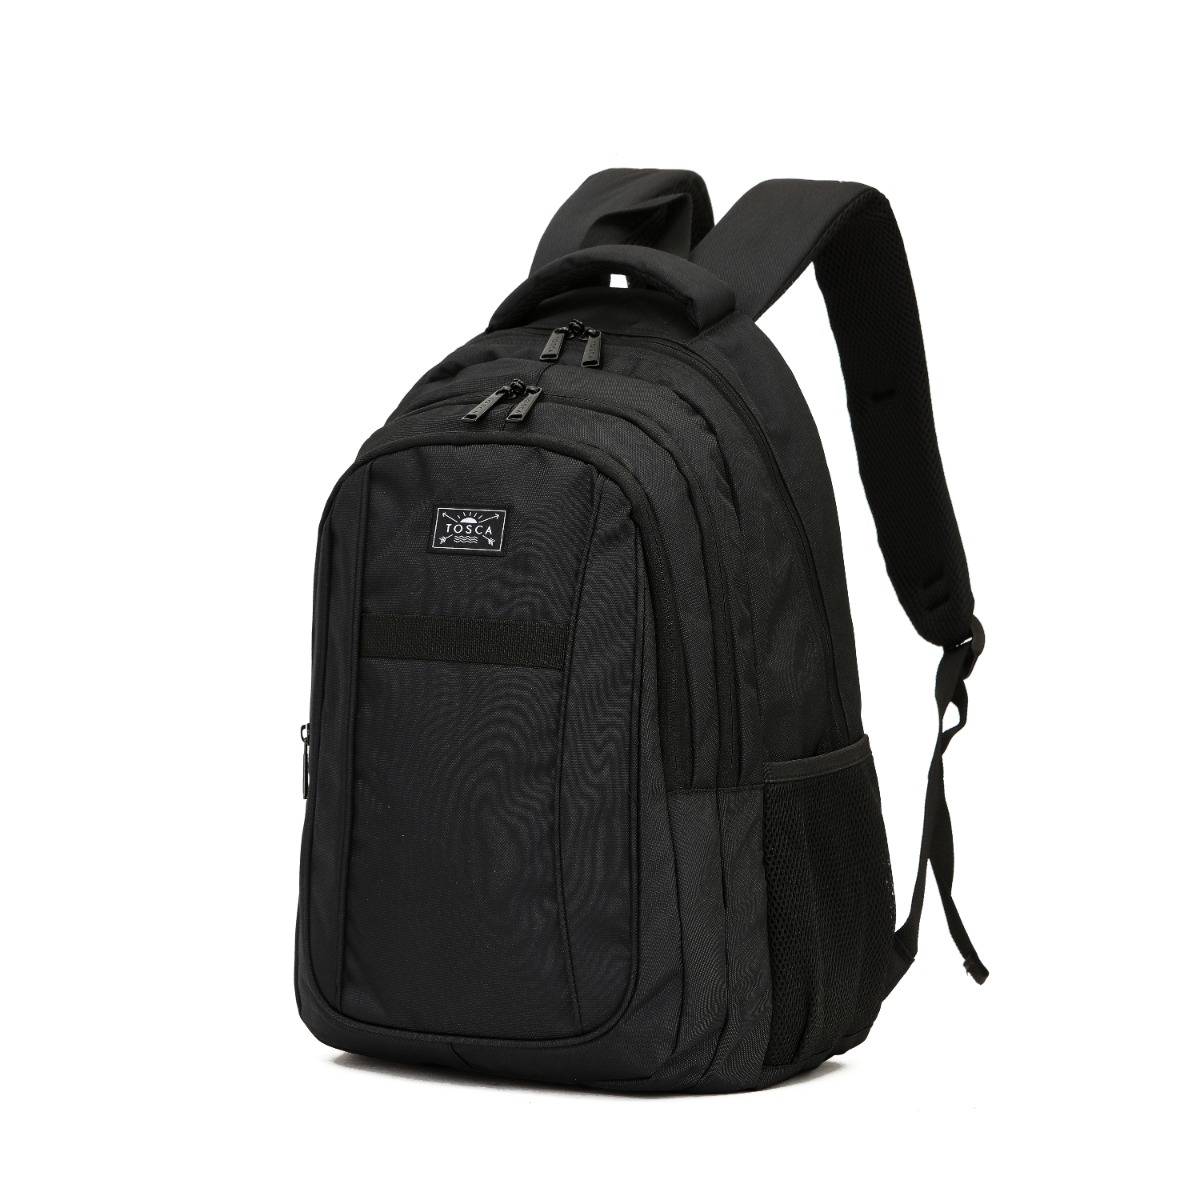 TOSCO 35LT FASHION DAY PACK BLACK Front